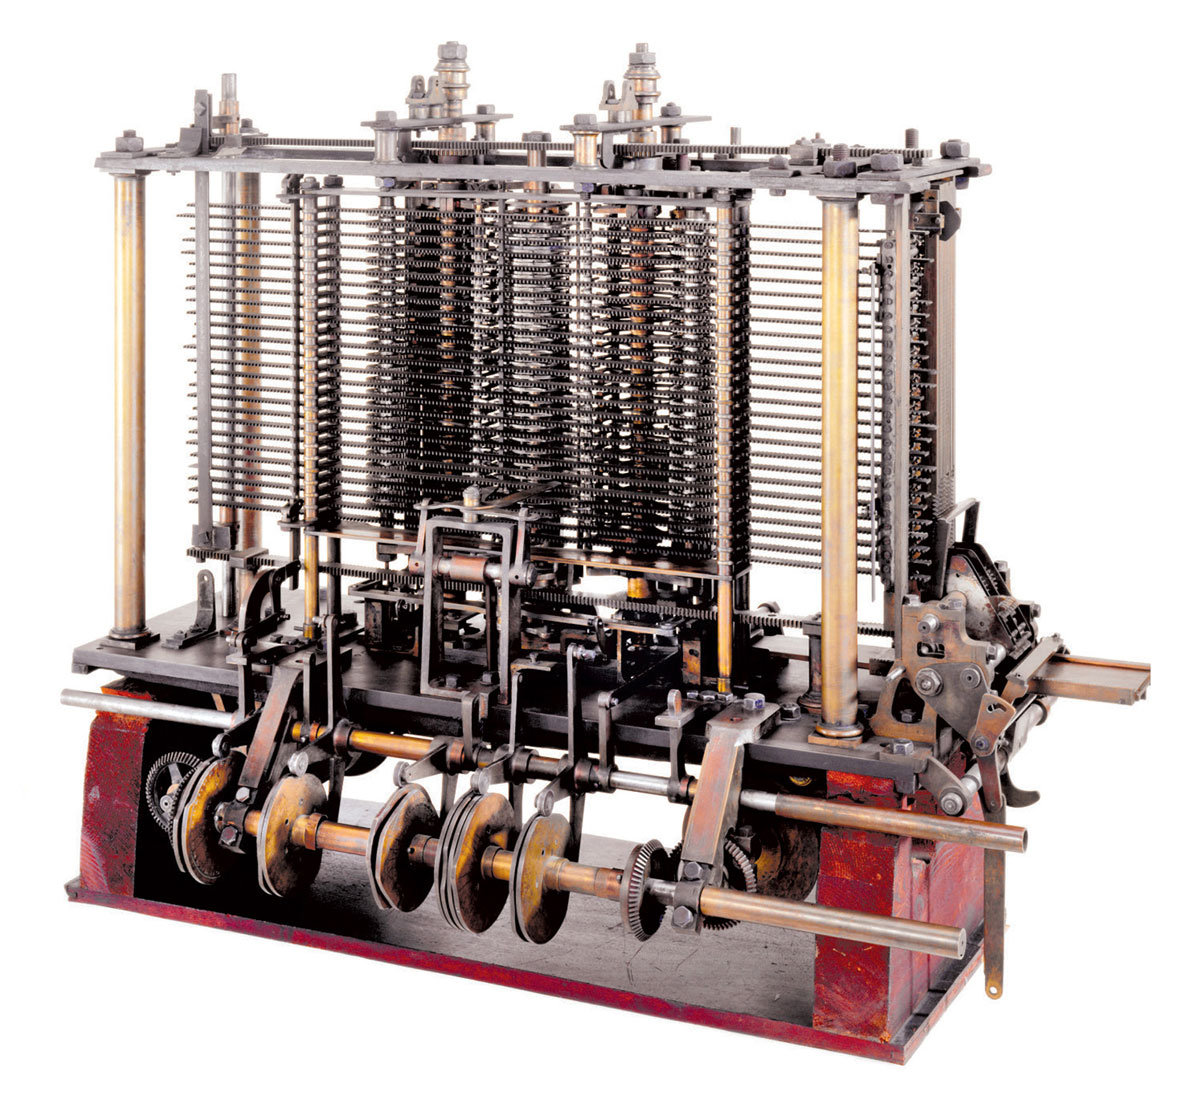 A photograph of Babbage’s Analytical Engine, created between 1834 and 1871, the first fully automatic calculating machine. 